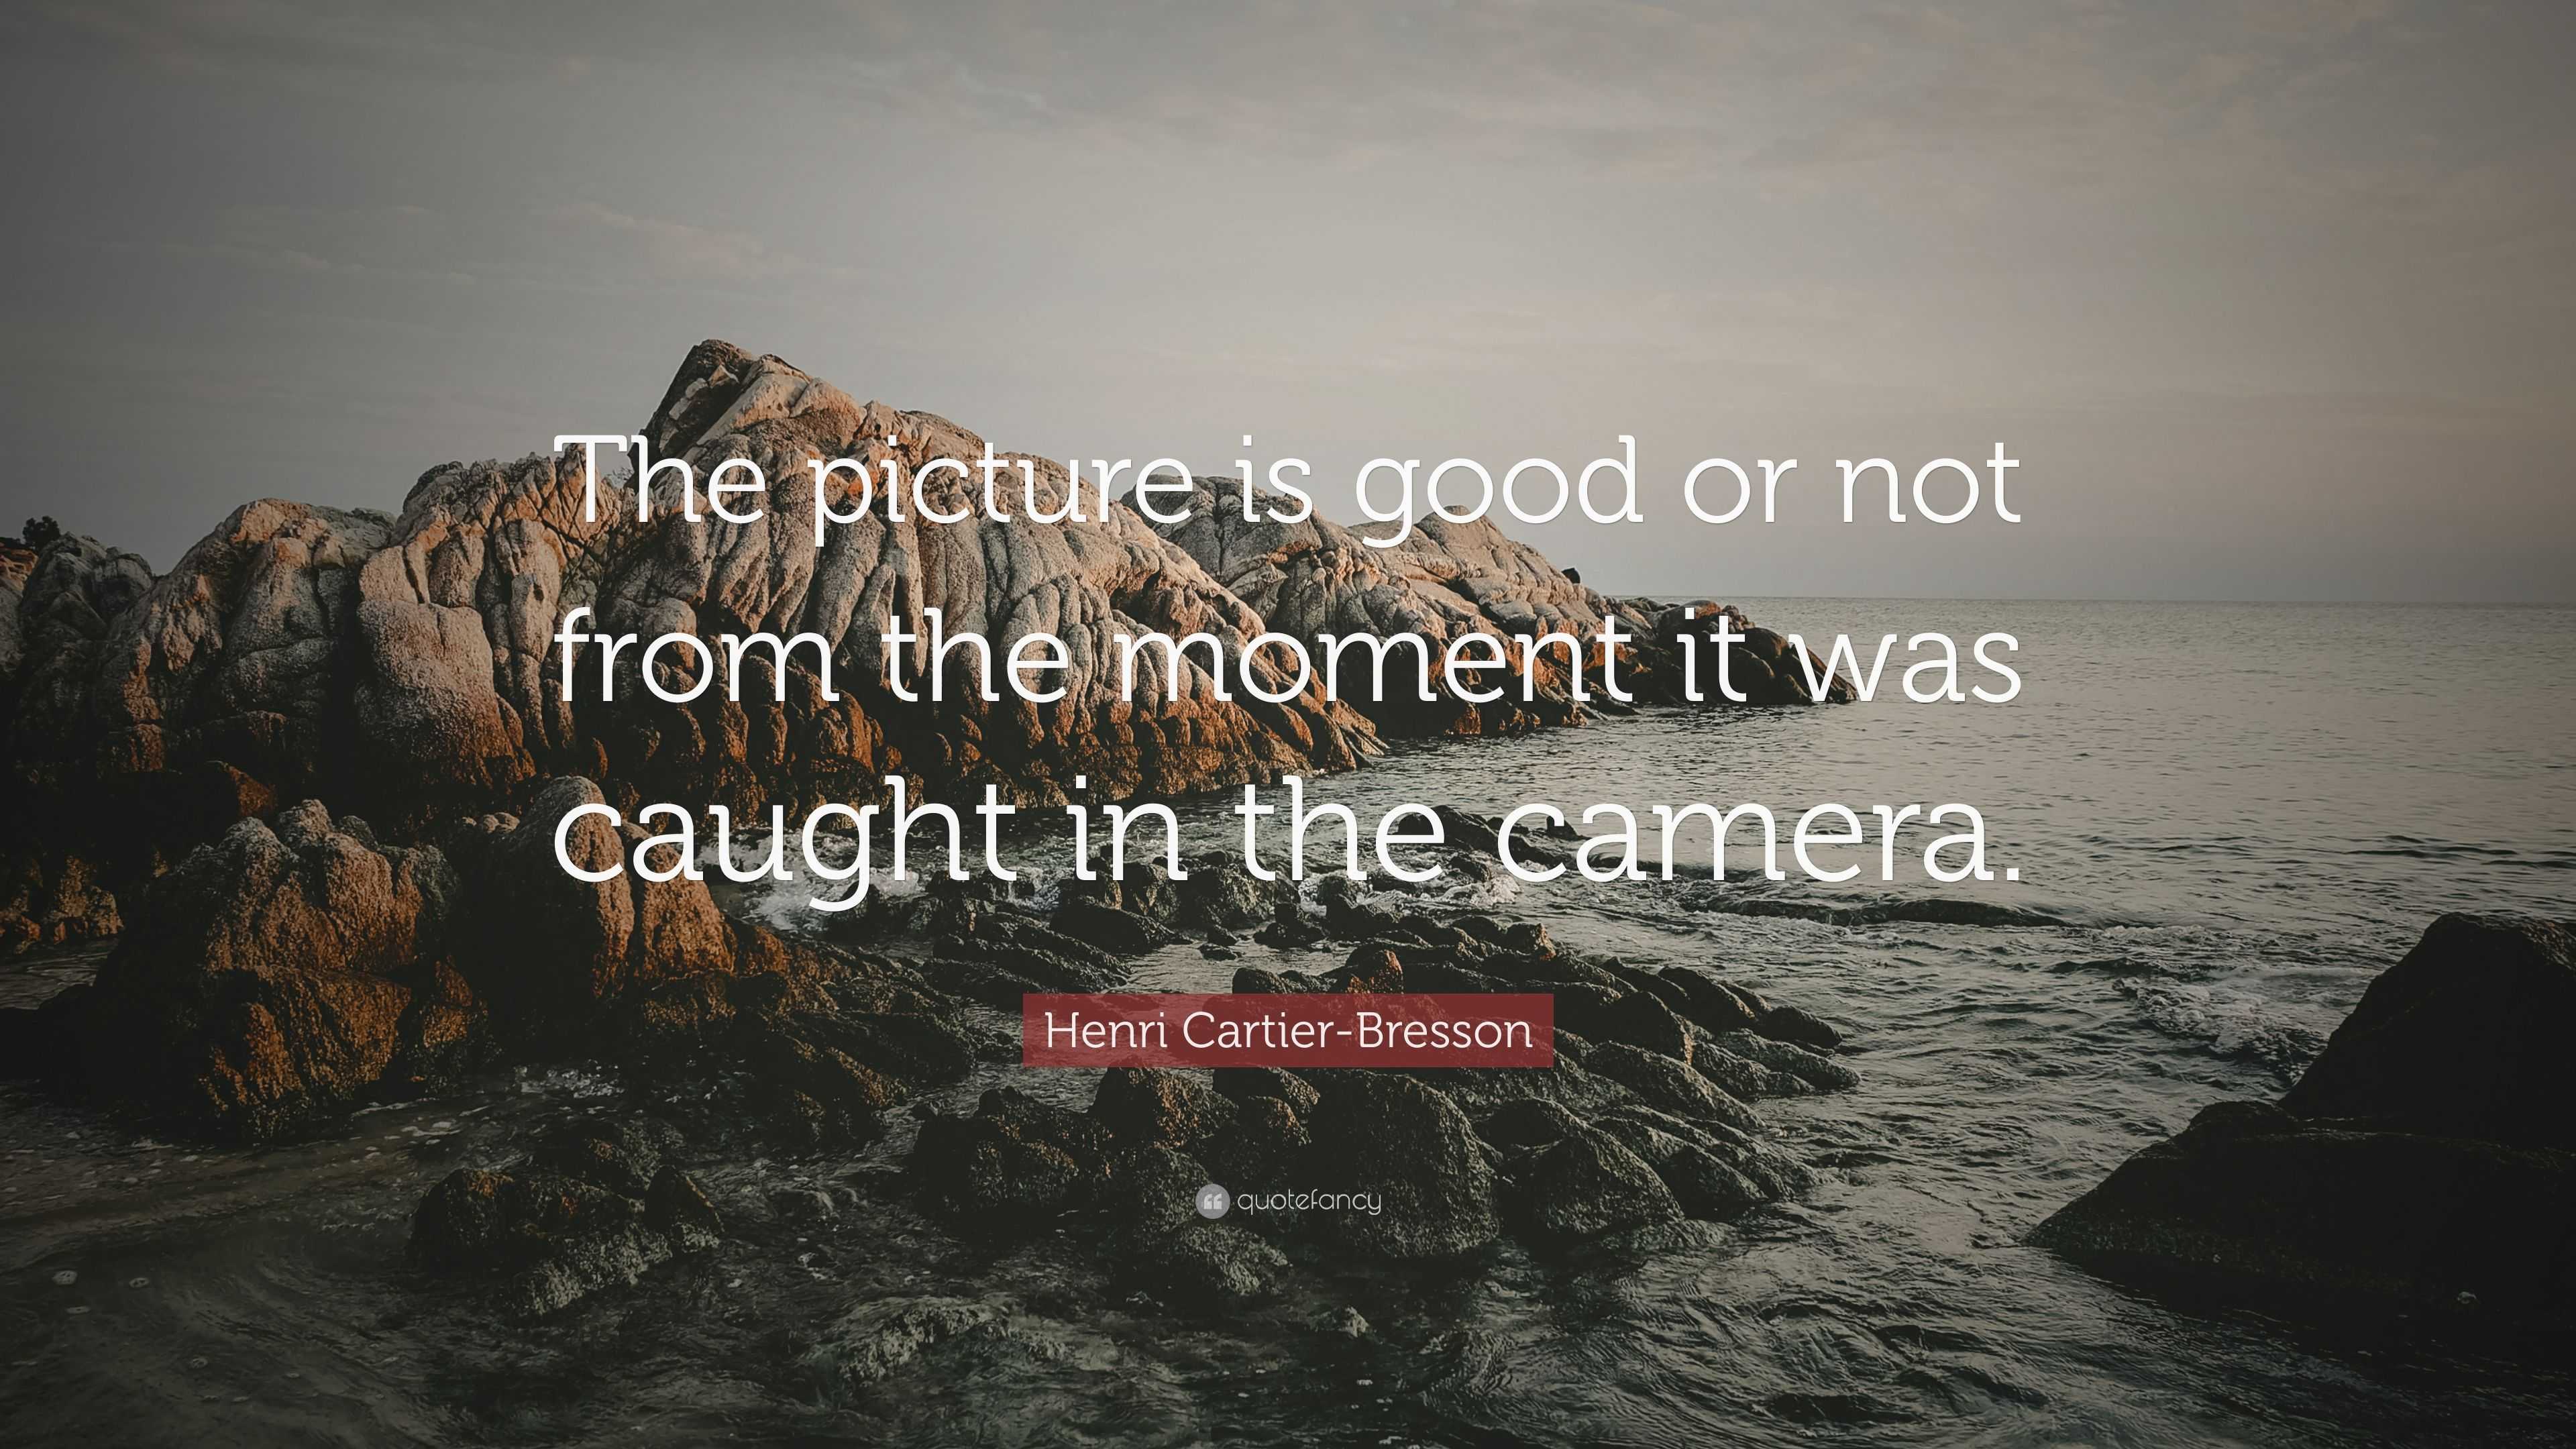 Henri Cartier-Bresson Quote: “The picture is good or not from the ...